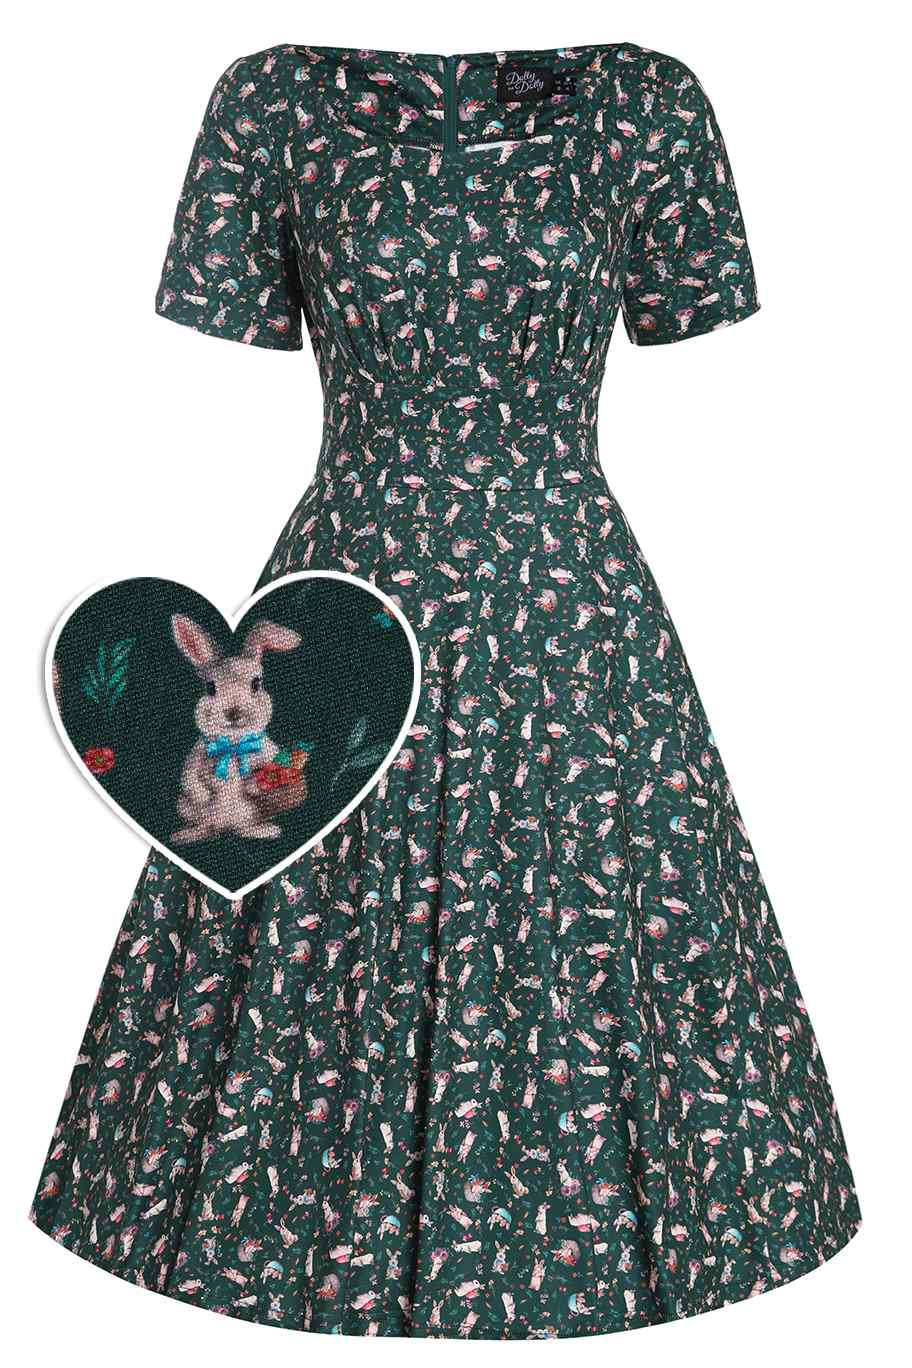 Front View of Bunny Print Flared Dress in Green